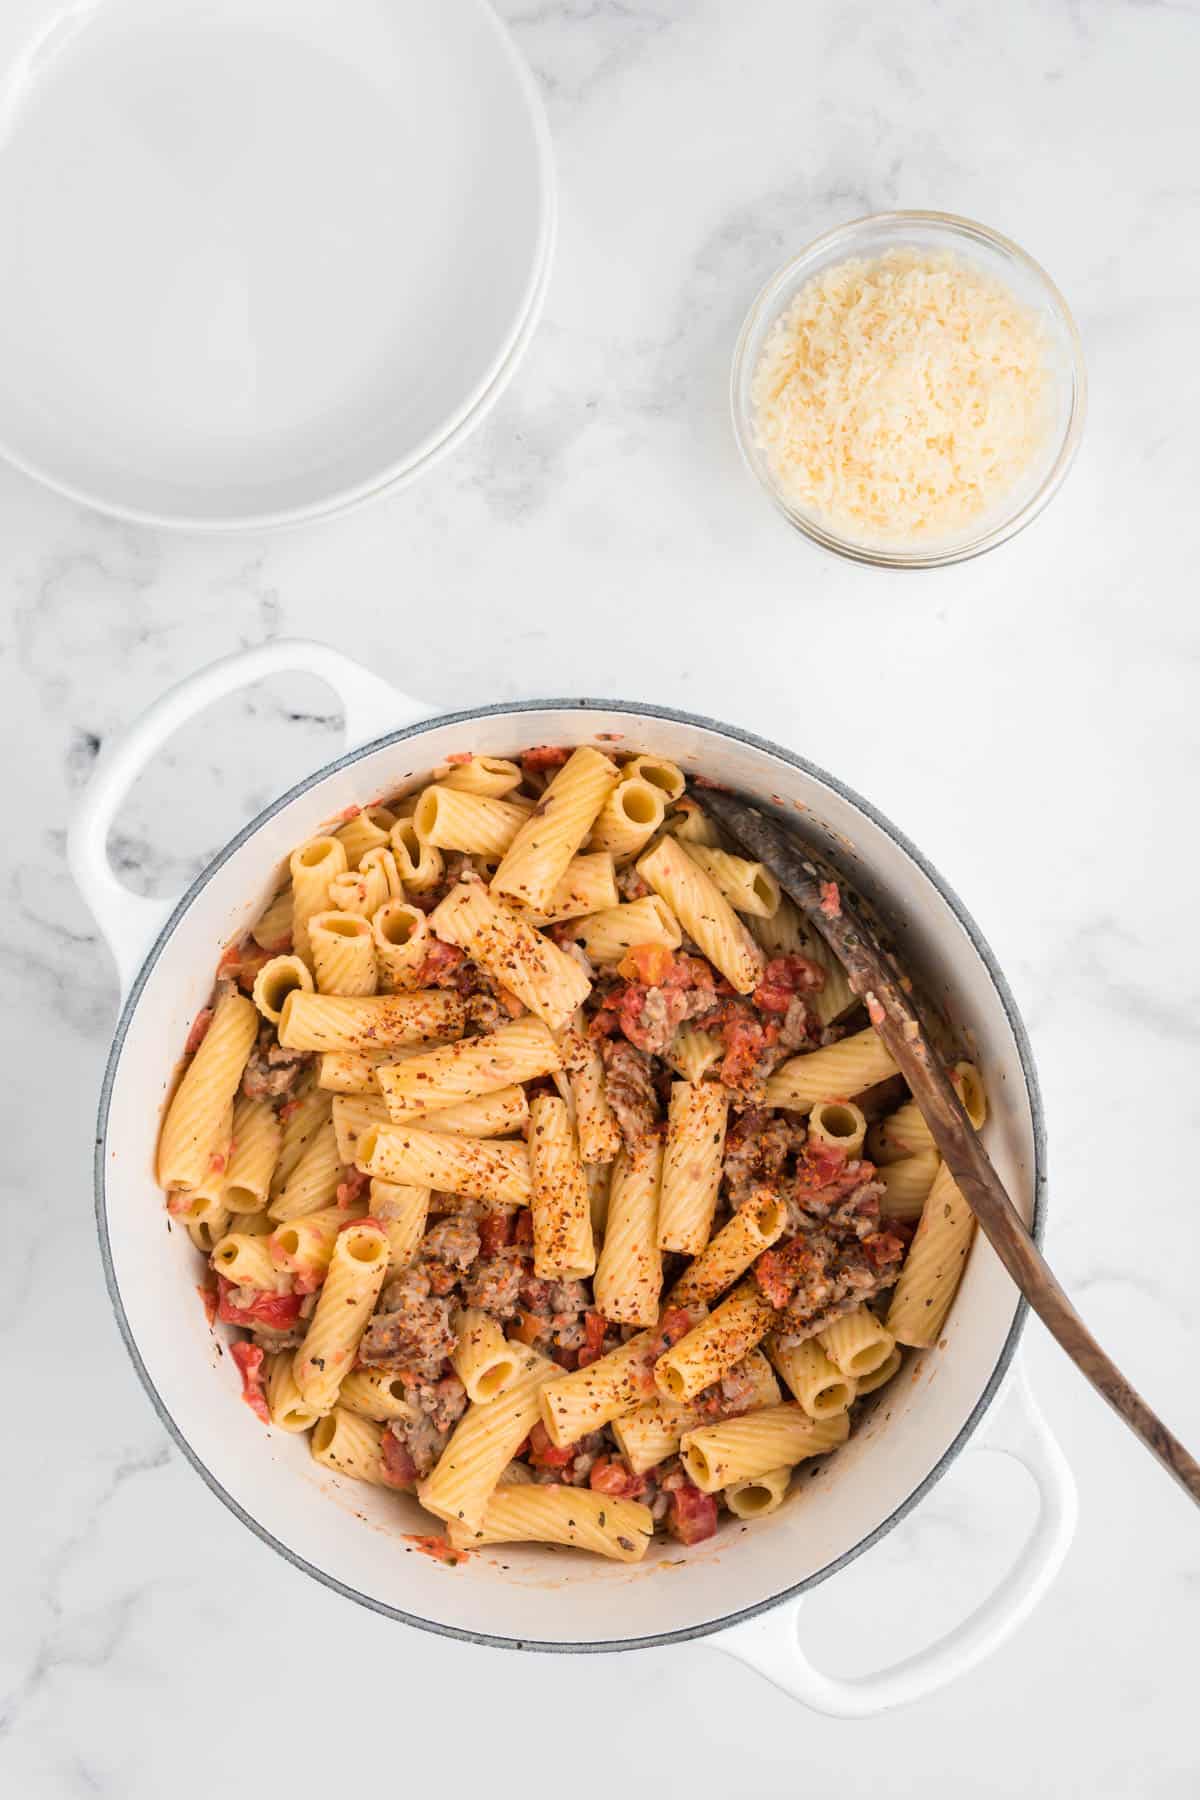 Spicy sausage pasta topped with red pepper flakes.